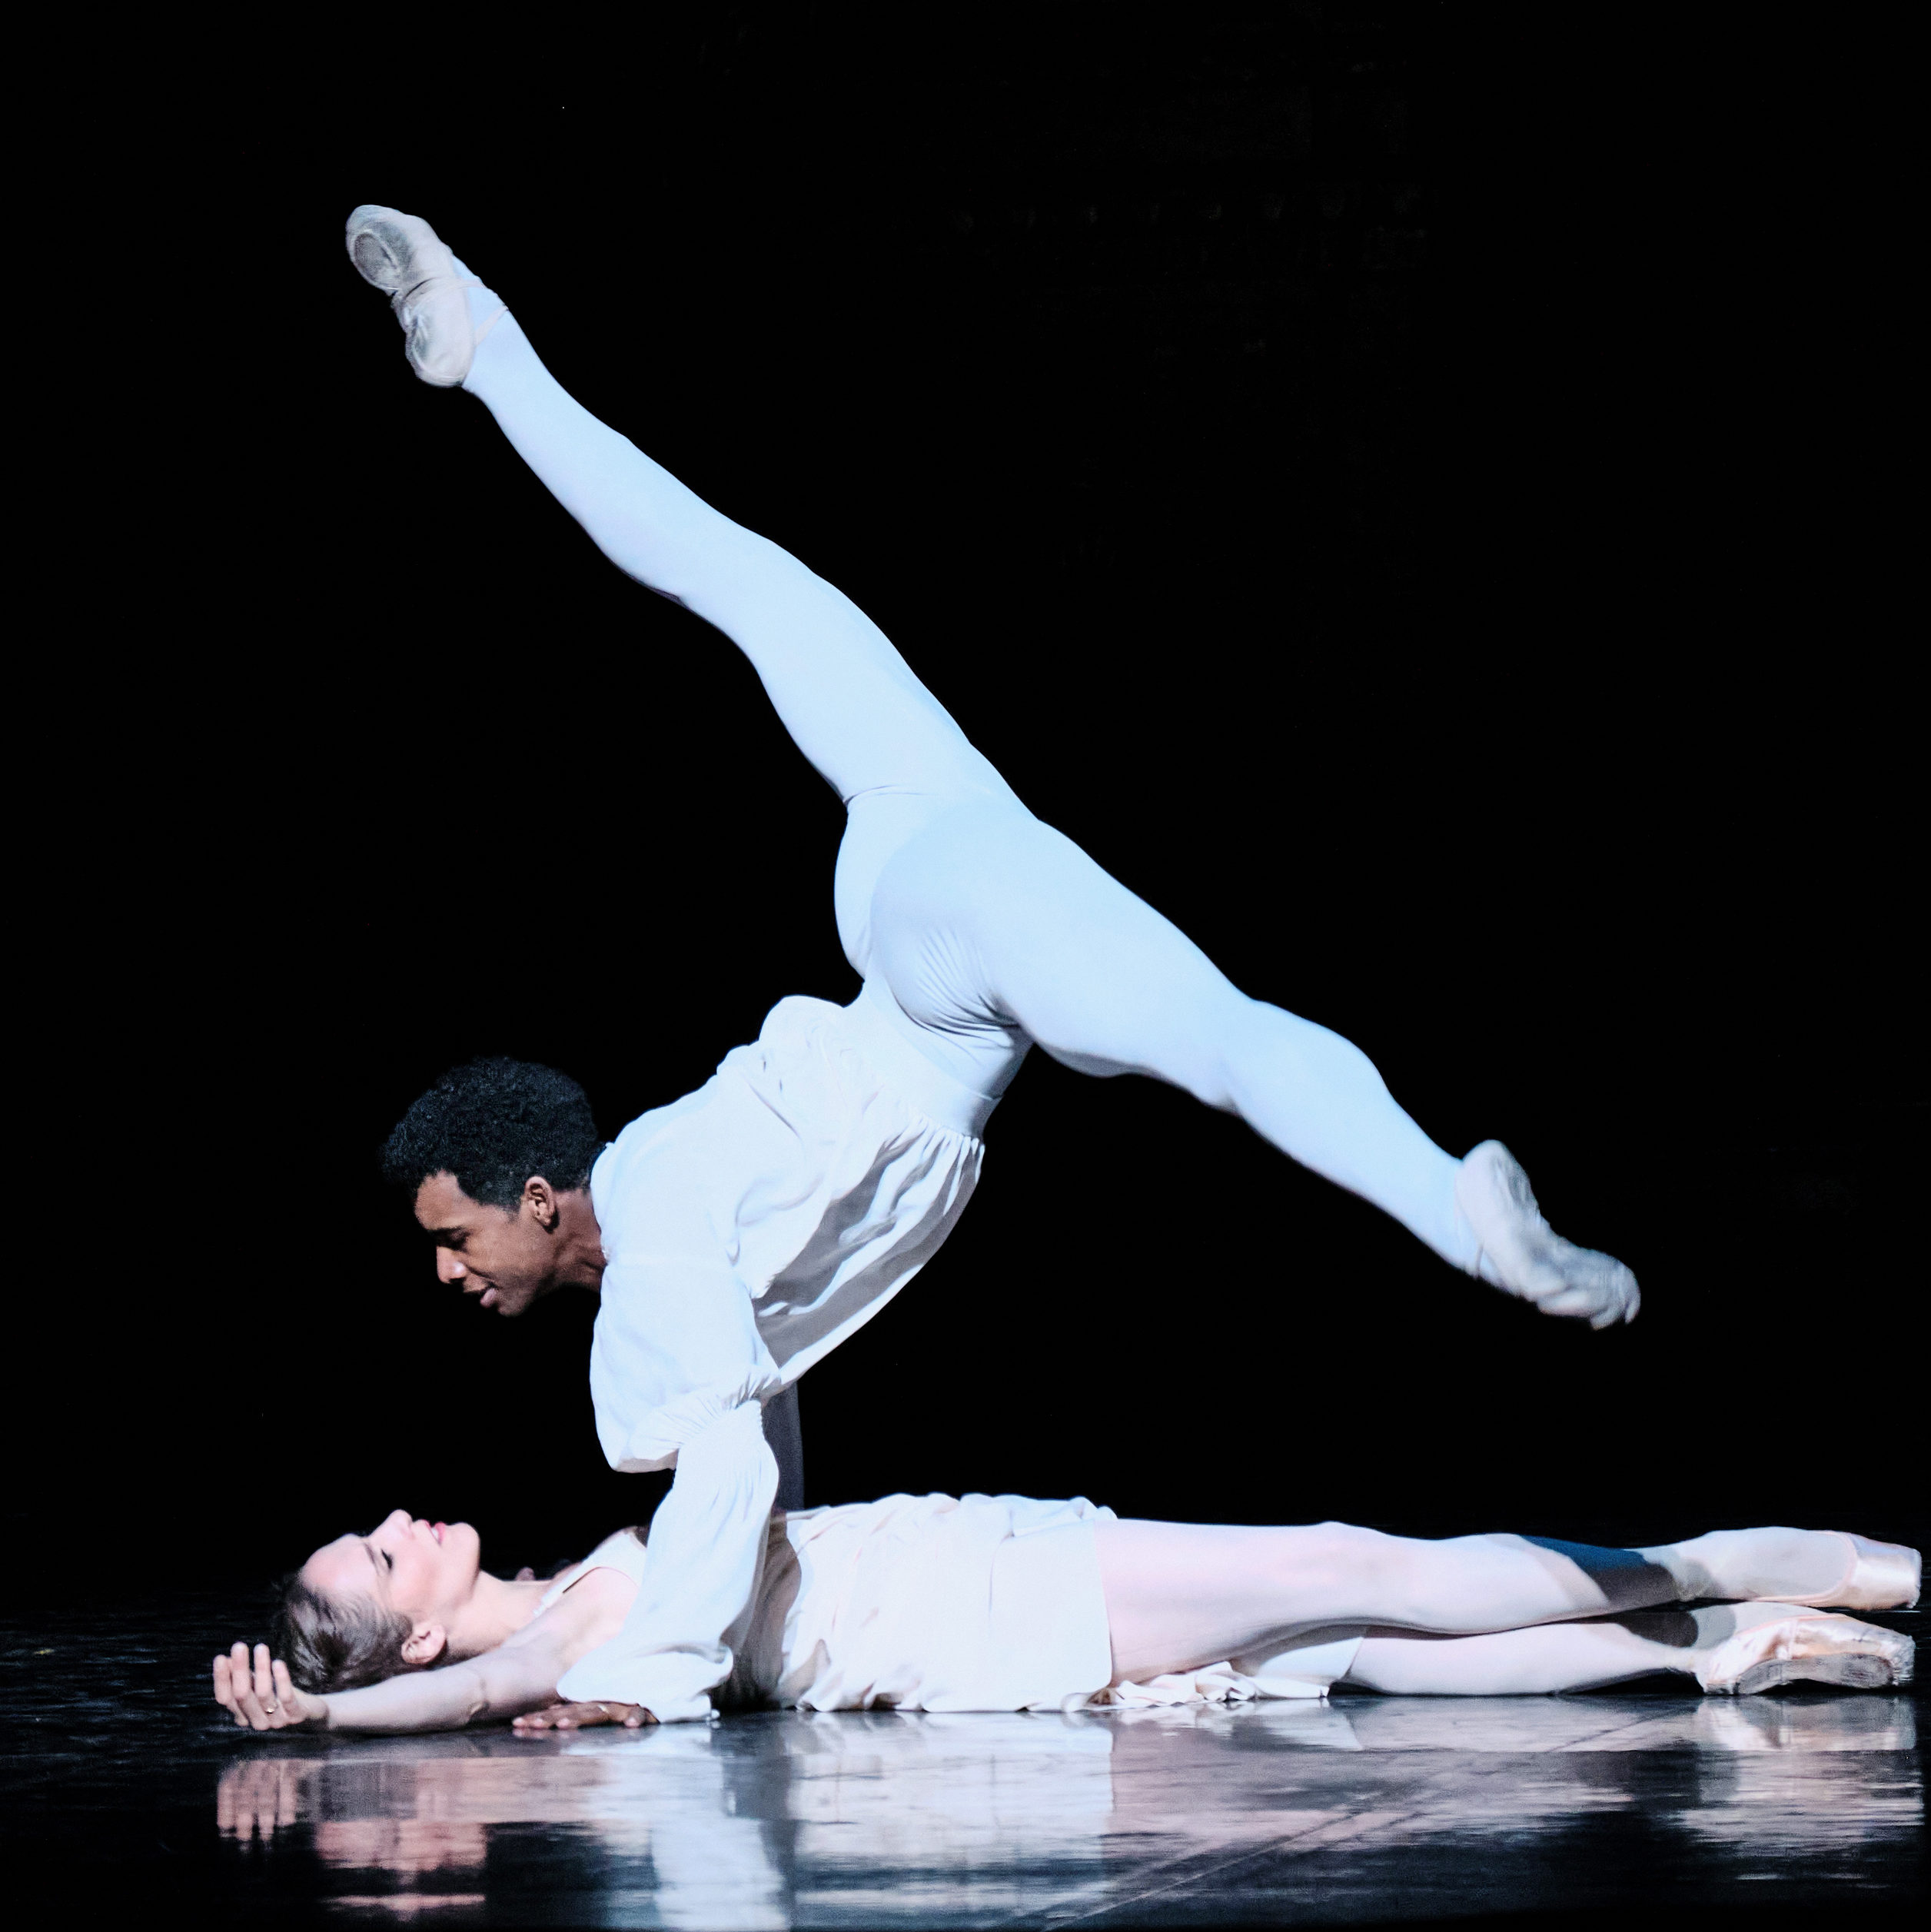 Osiel Gouneo and Valentine Colasante, in white costumes, perform onstage. Gouneo is in a split position balanced on his hands, looking at Colasante, who is lying on the stage beneath him.